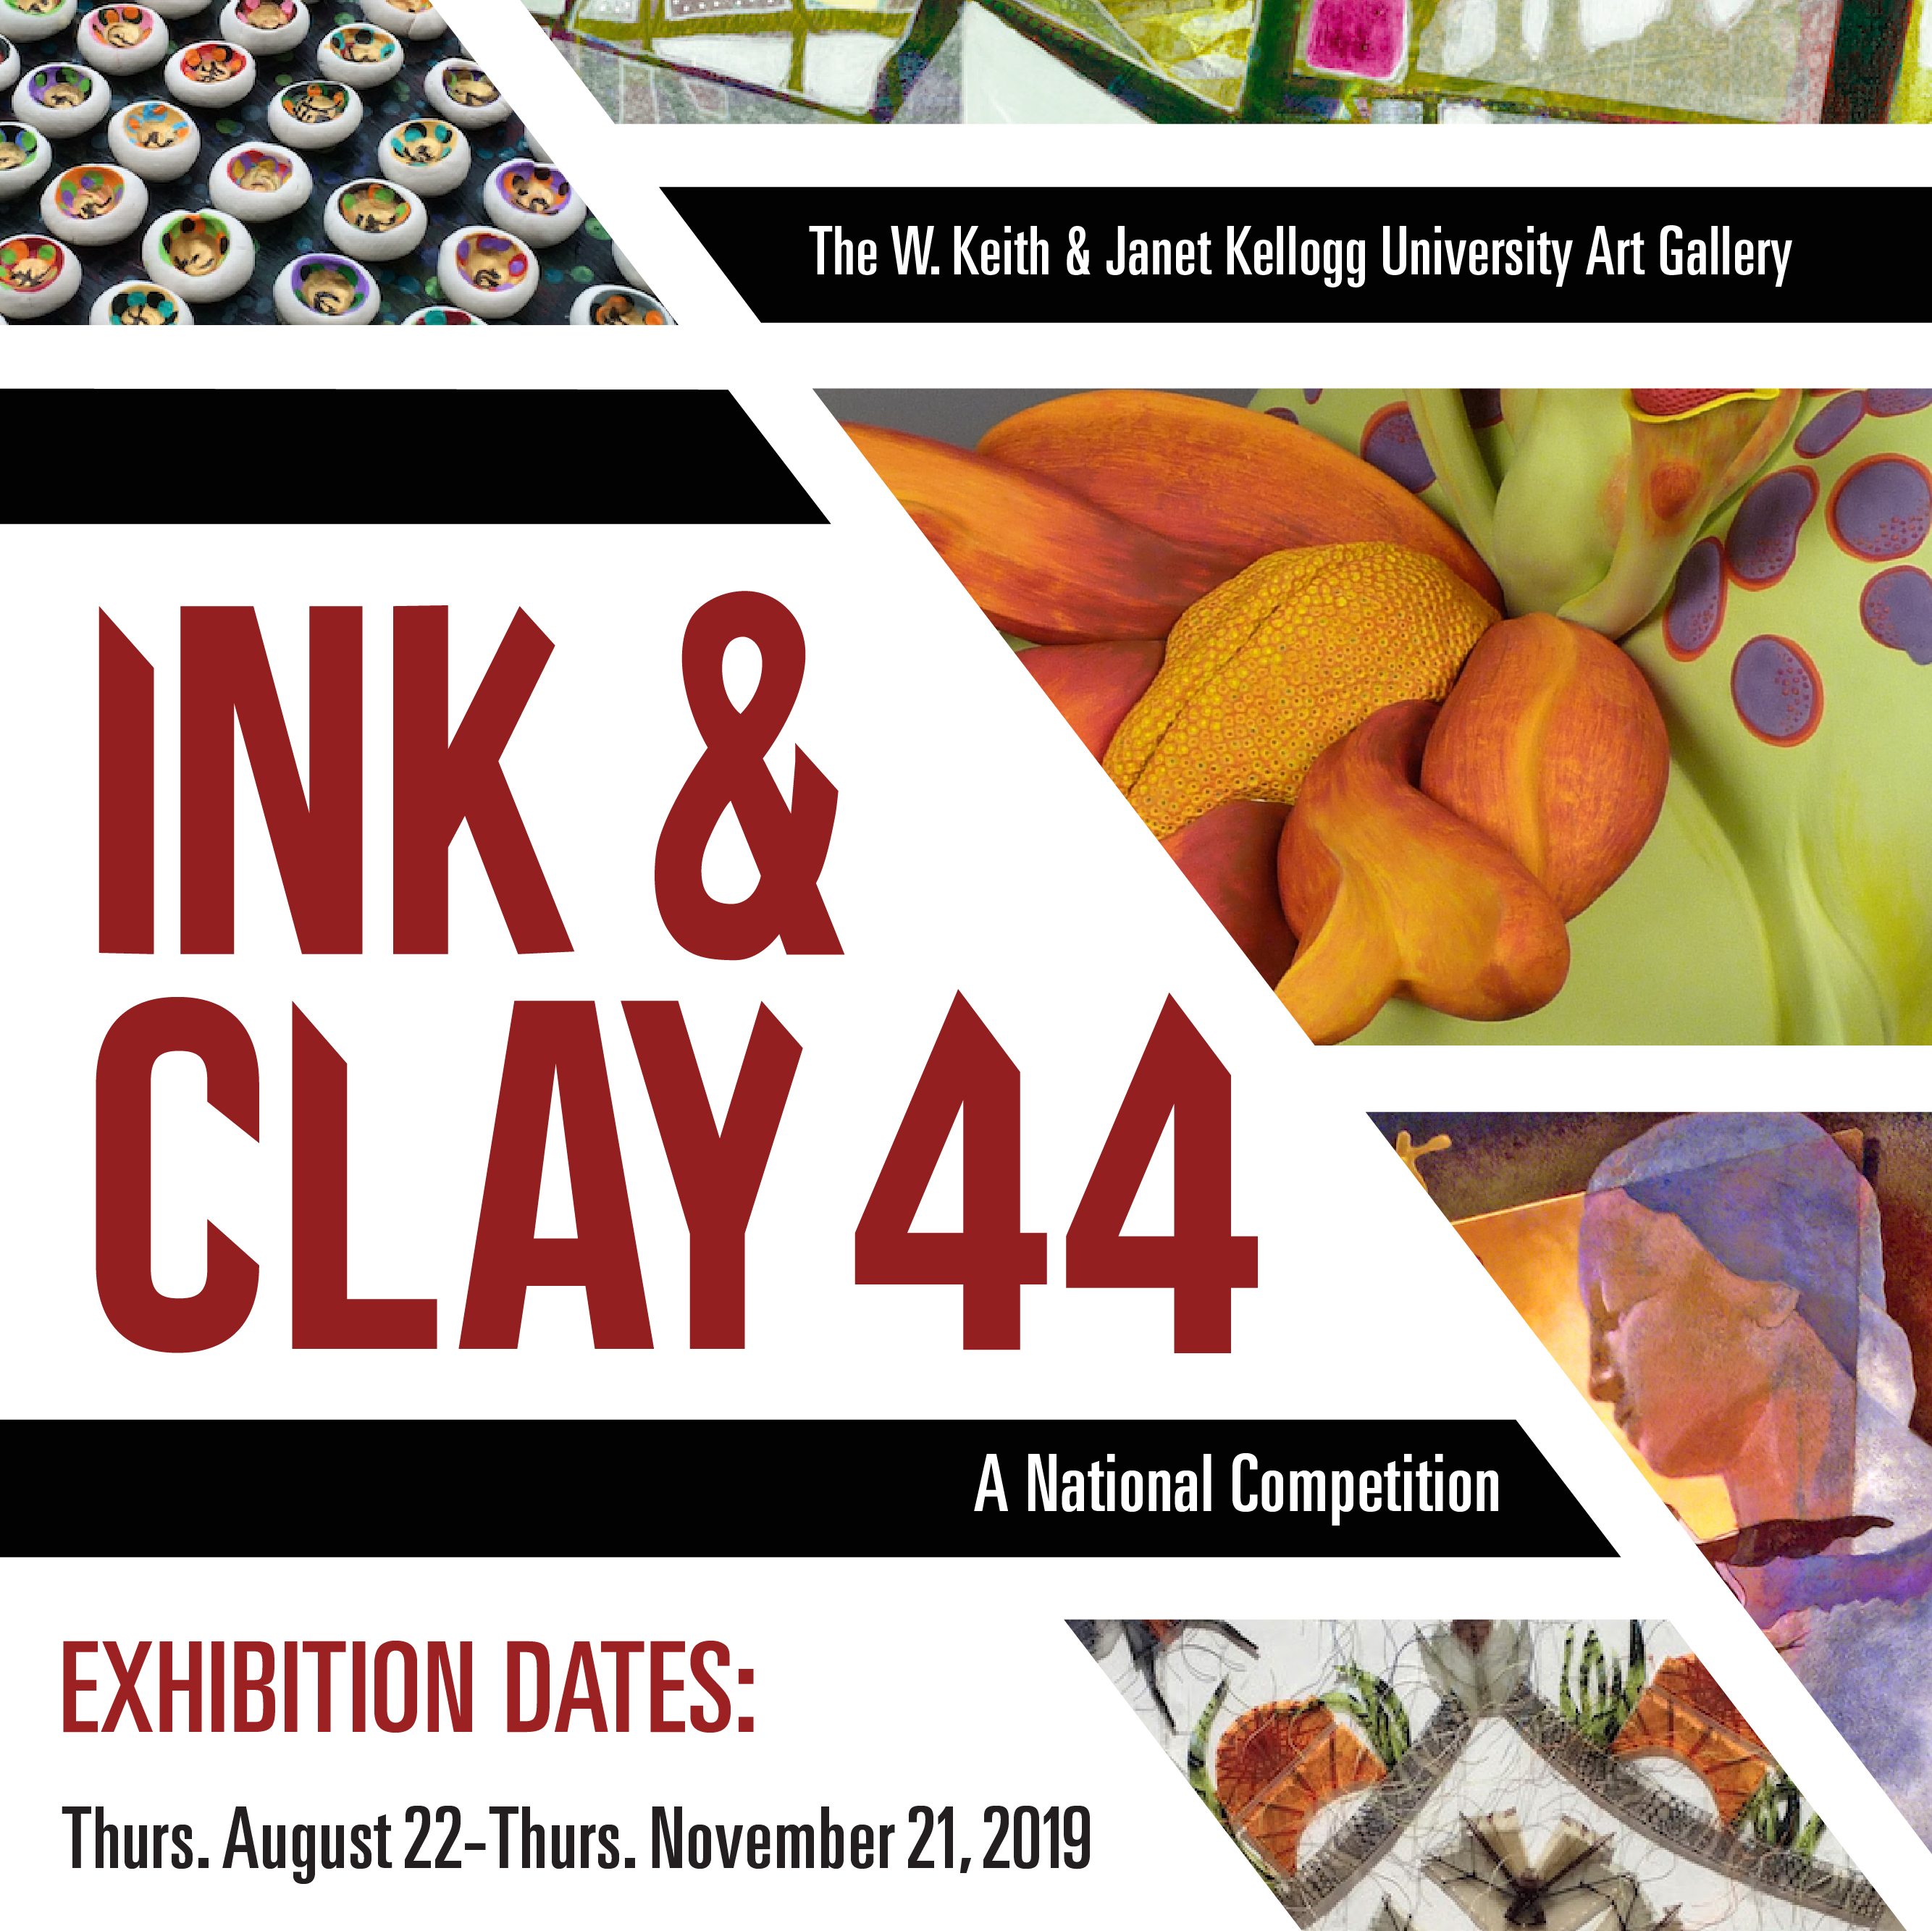 The W. Keith & Janet Kellogg University Art Gallery.  Ink & Clay 44.  A National Competition.  Exhibition Dates: Thurs. August 22 - Thurs. November 21, 2019